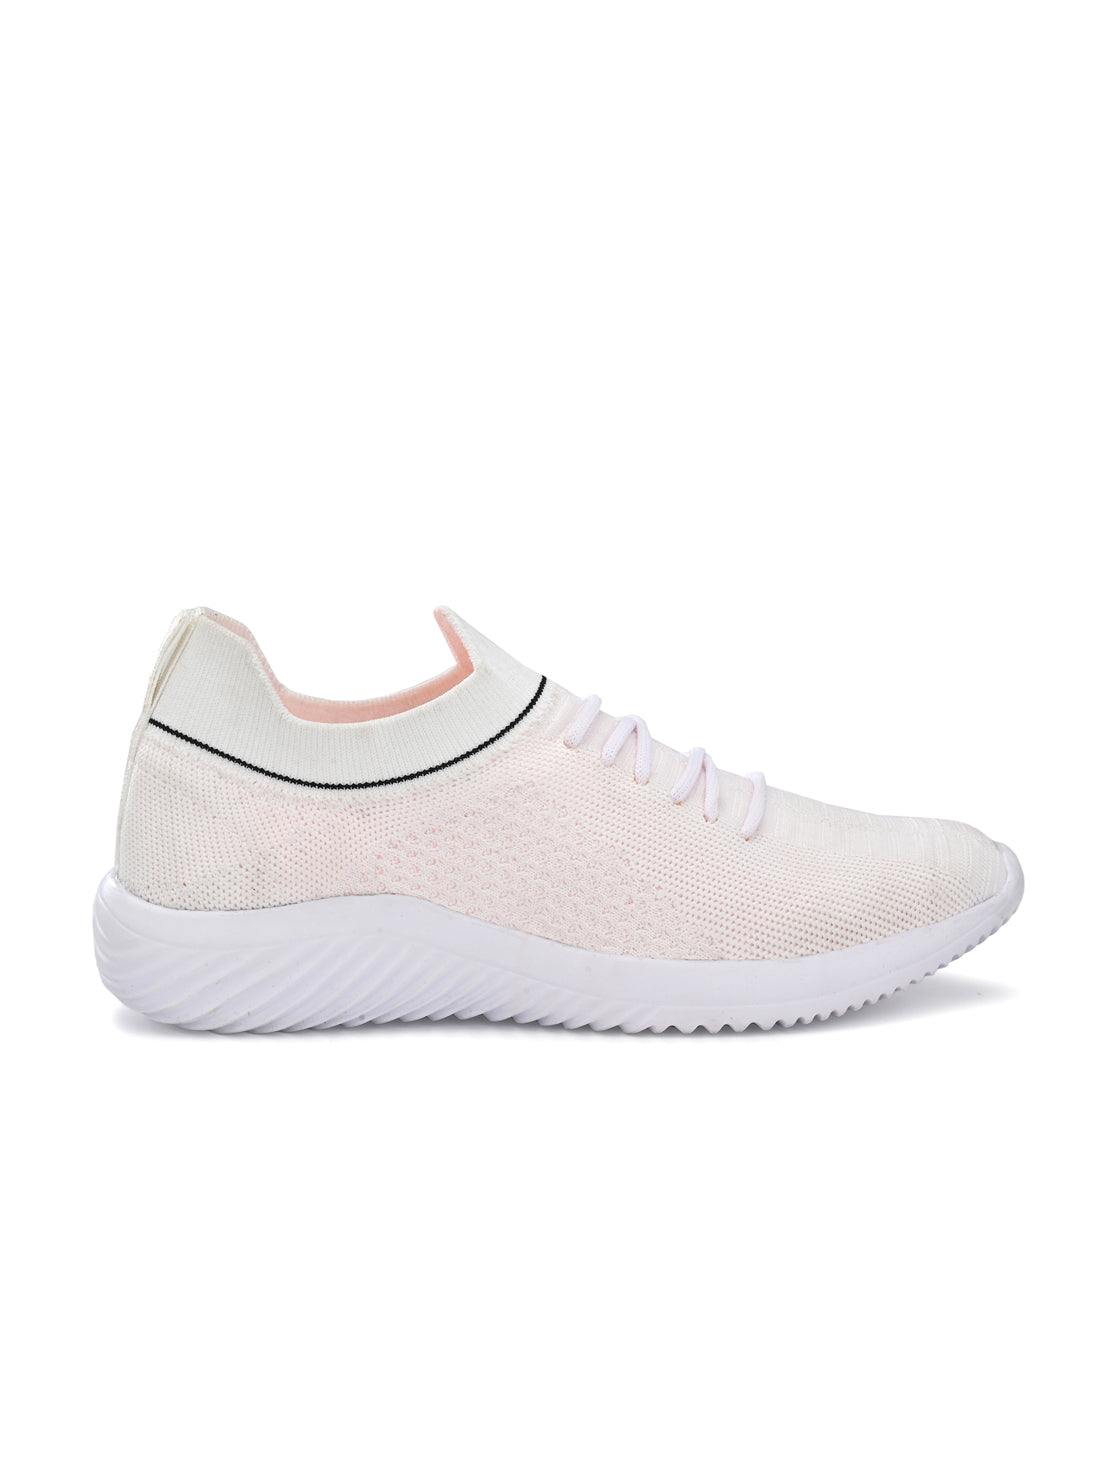 Hirolas® Women White Casual Running Walking Jogging Gym comfortable Athletic Lace-Up Sports_Shoes (HRLWF01WHT)